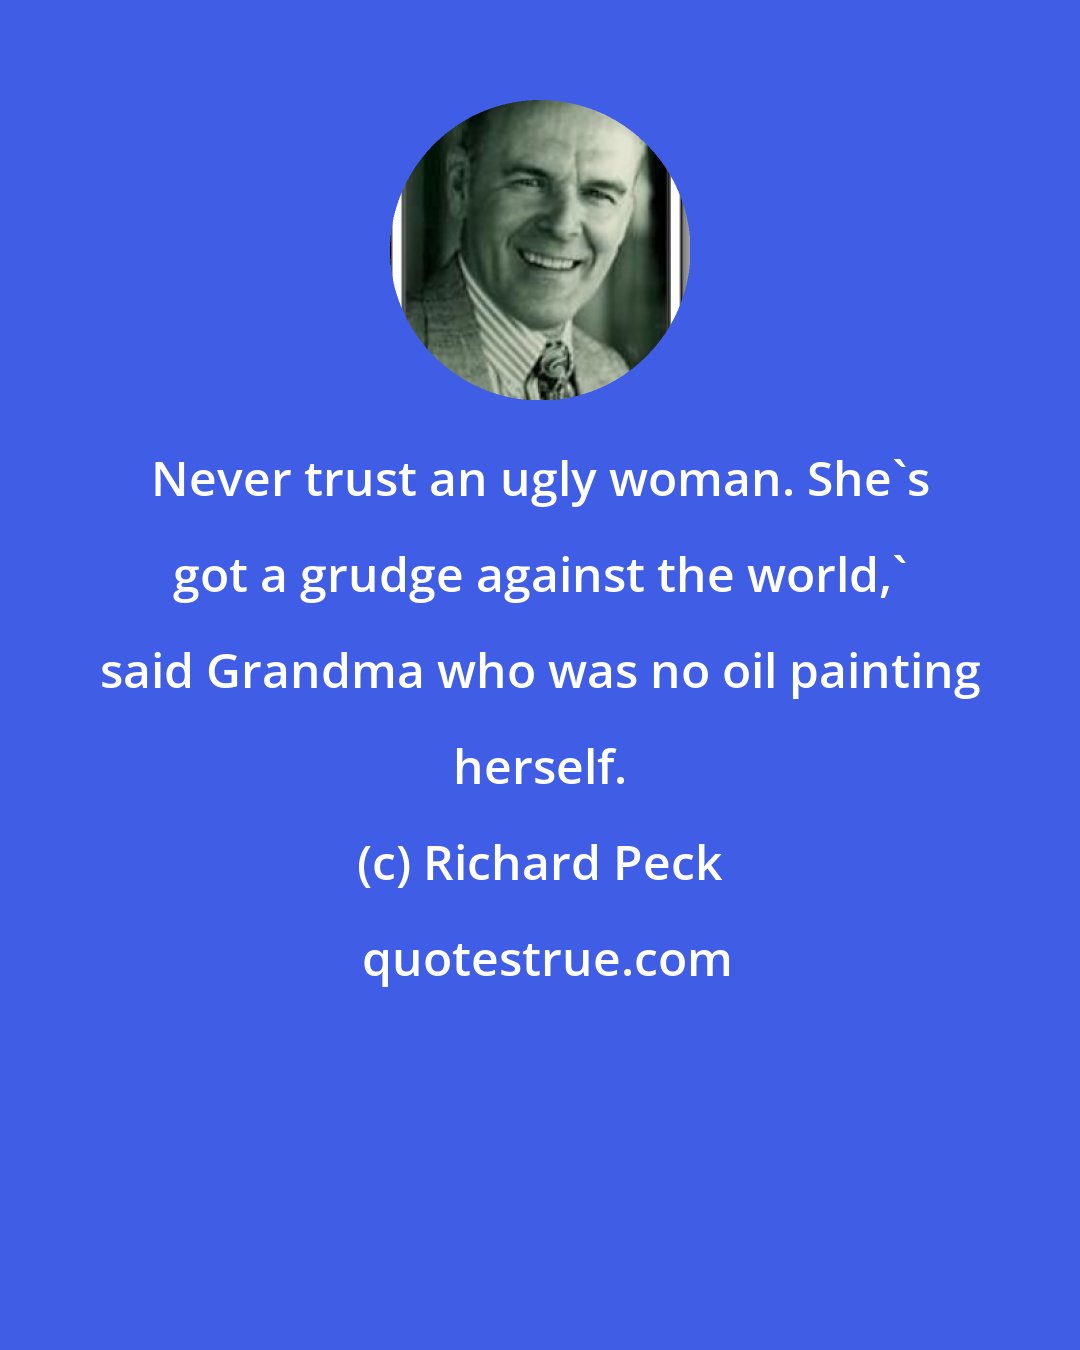 Richard Peck: Never trust an ugly woman. She's got a grudge against the world,' said Grandma who was no oil painting herself.